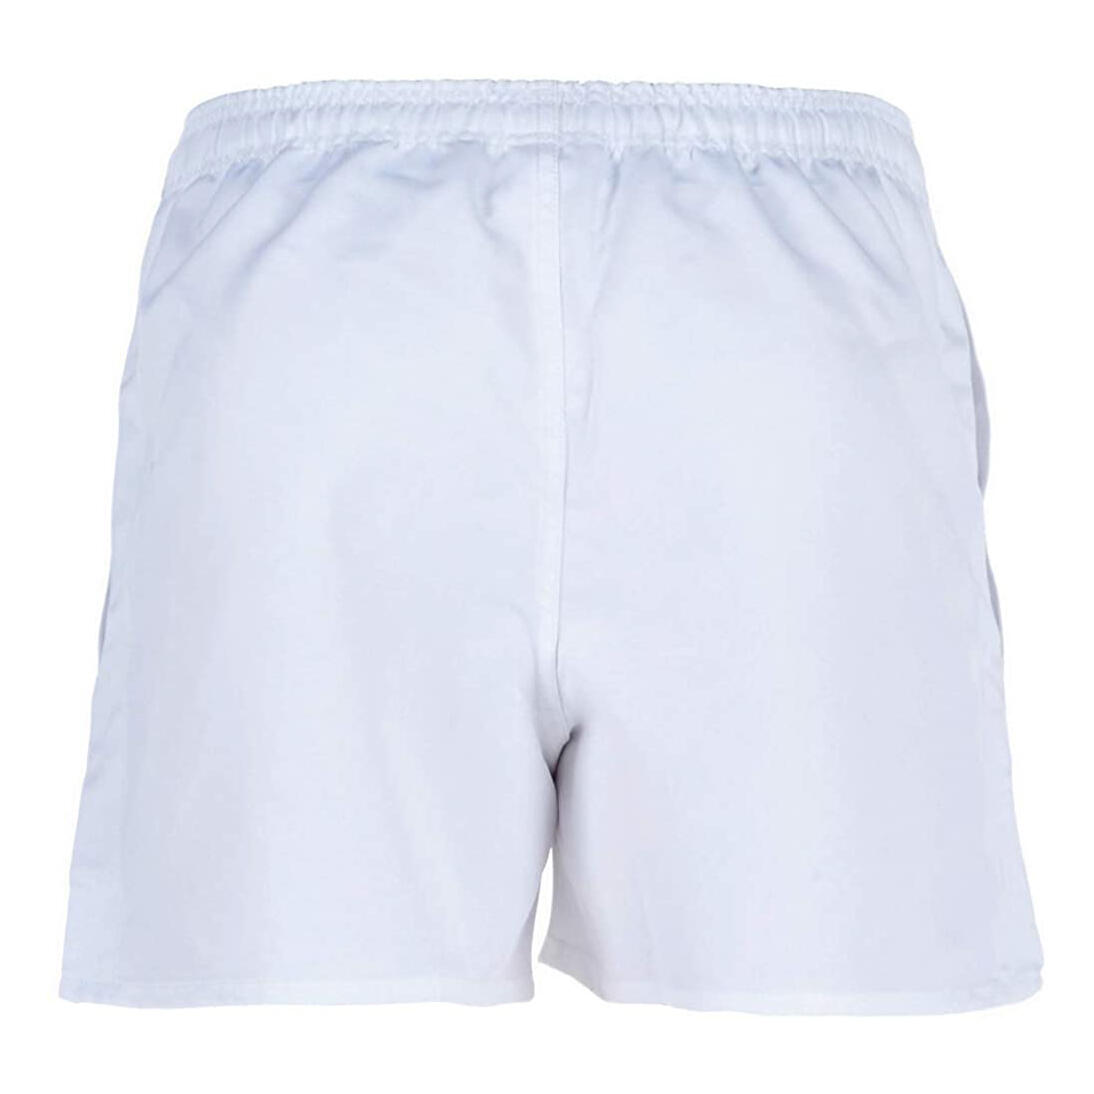 Childrens/Kids Polyester Rugby Shorts (White) 2/3